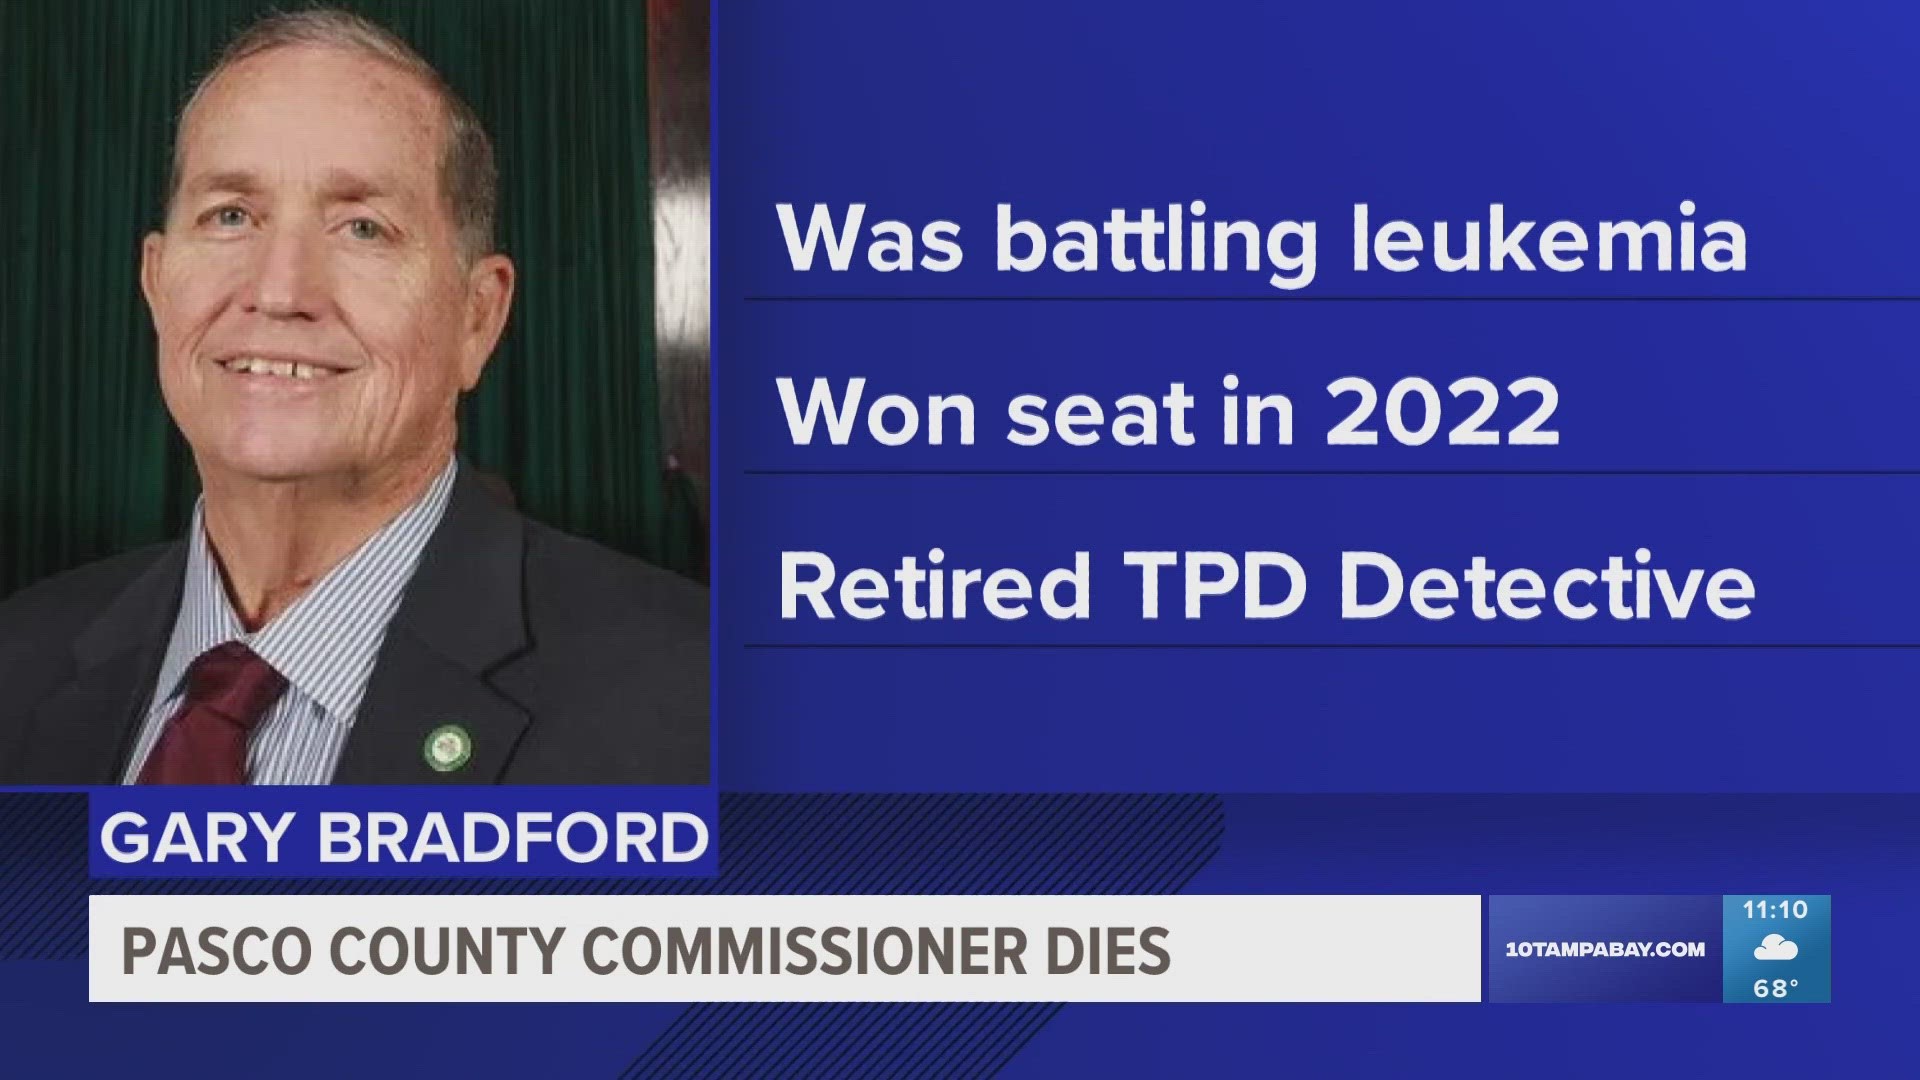 He was diagnosed with leukemia months after he became commissioner in 2022.